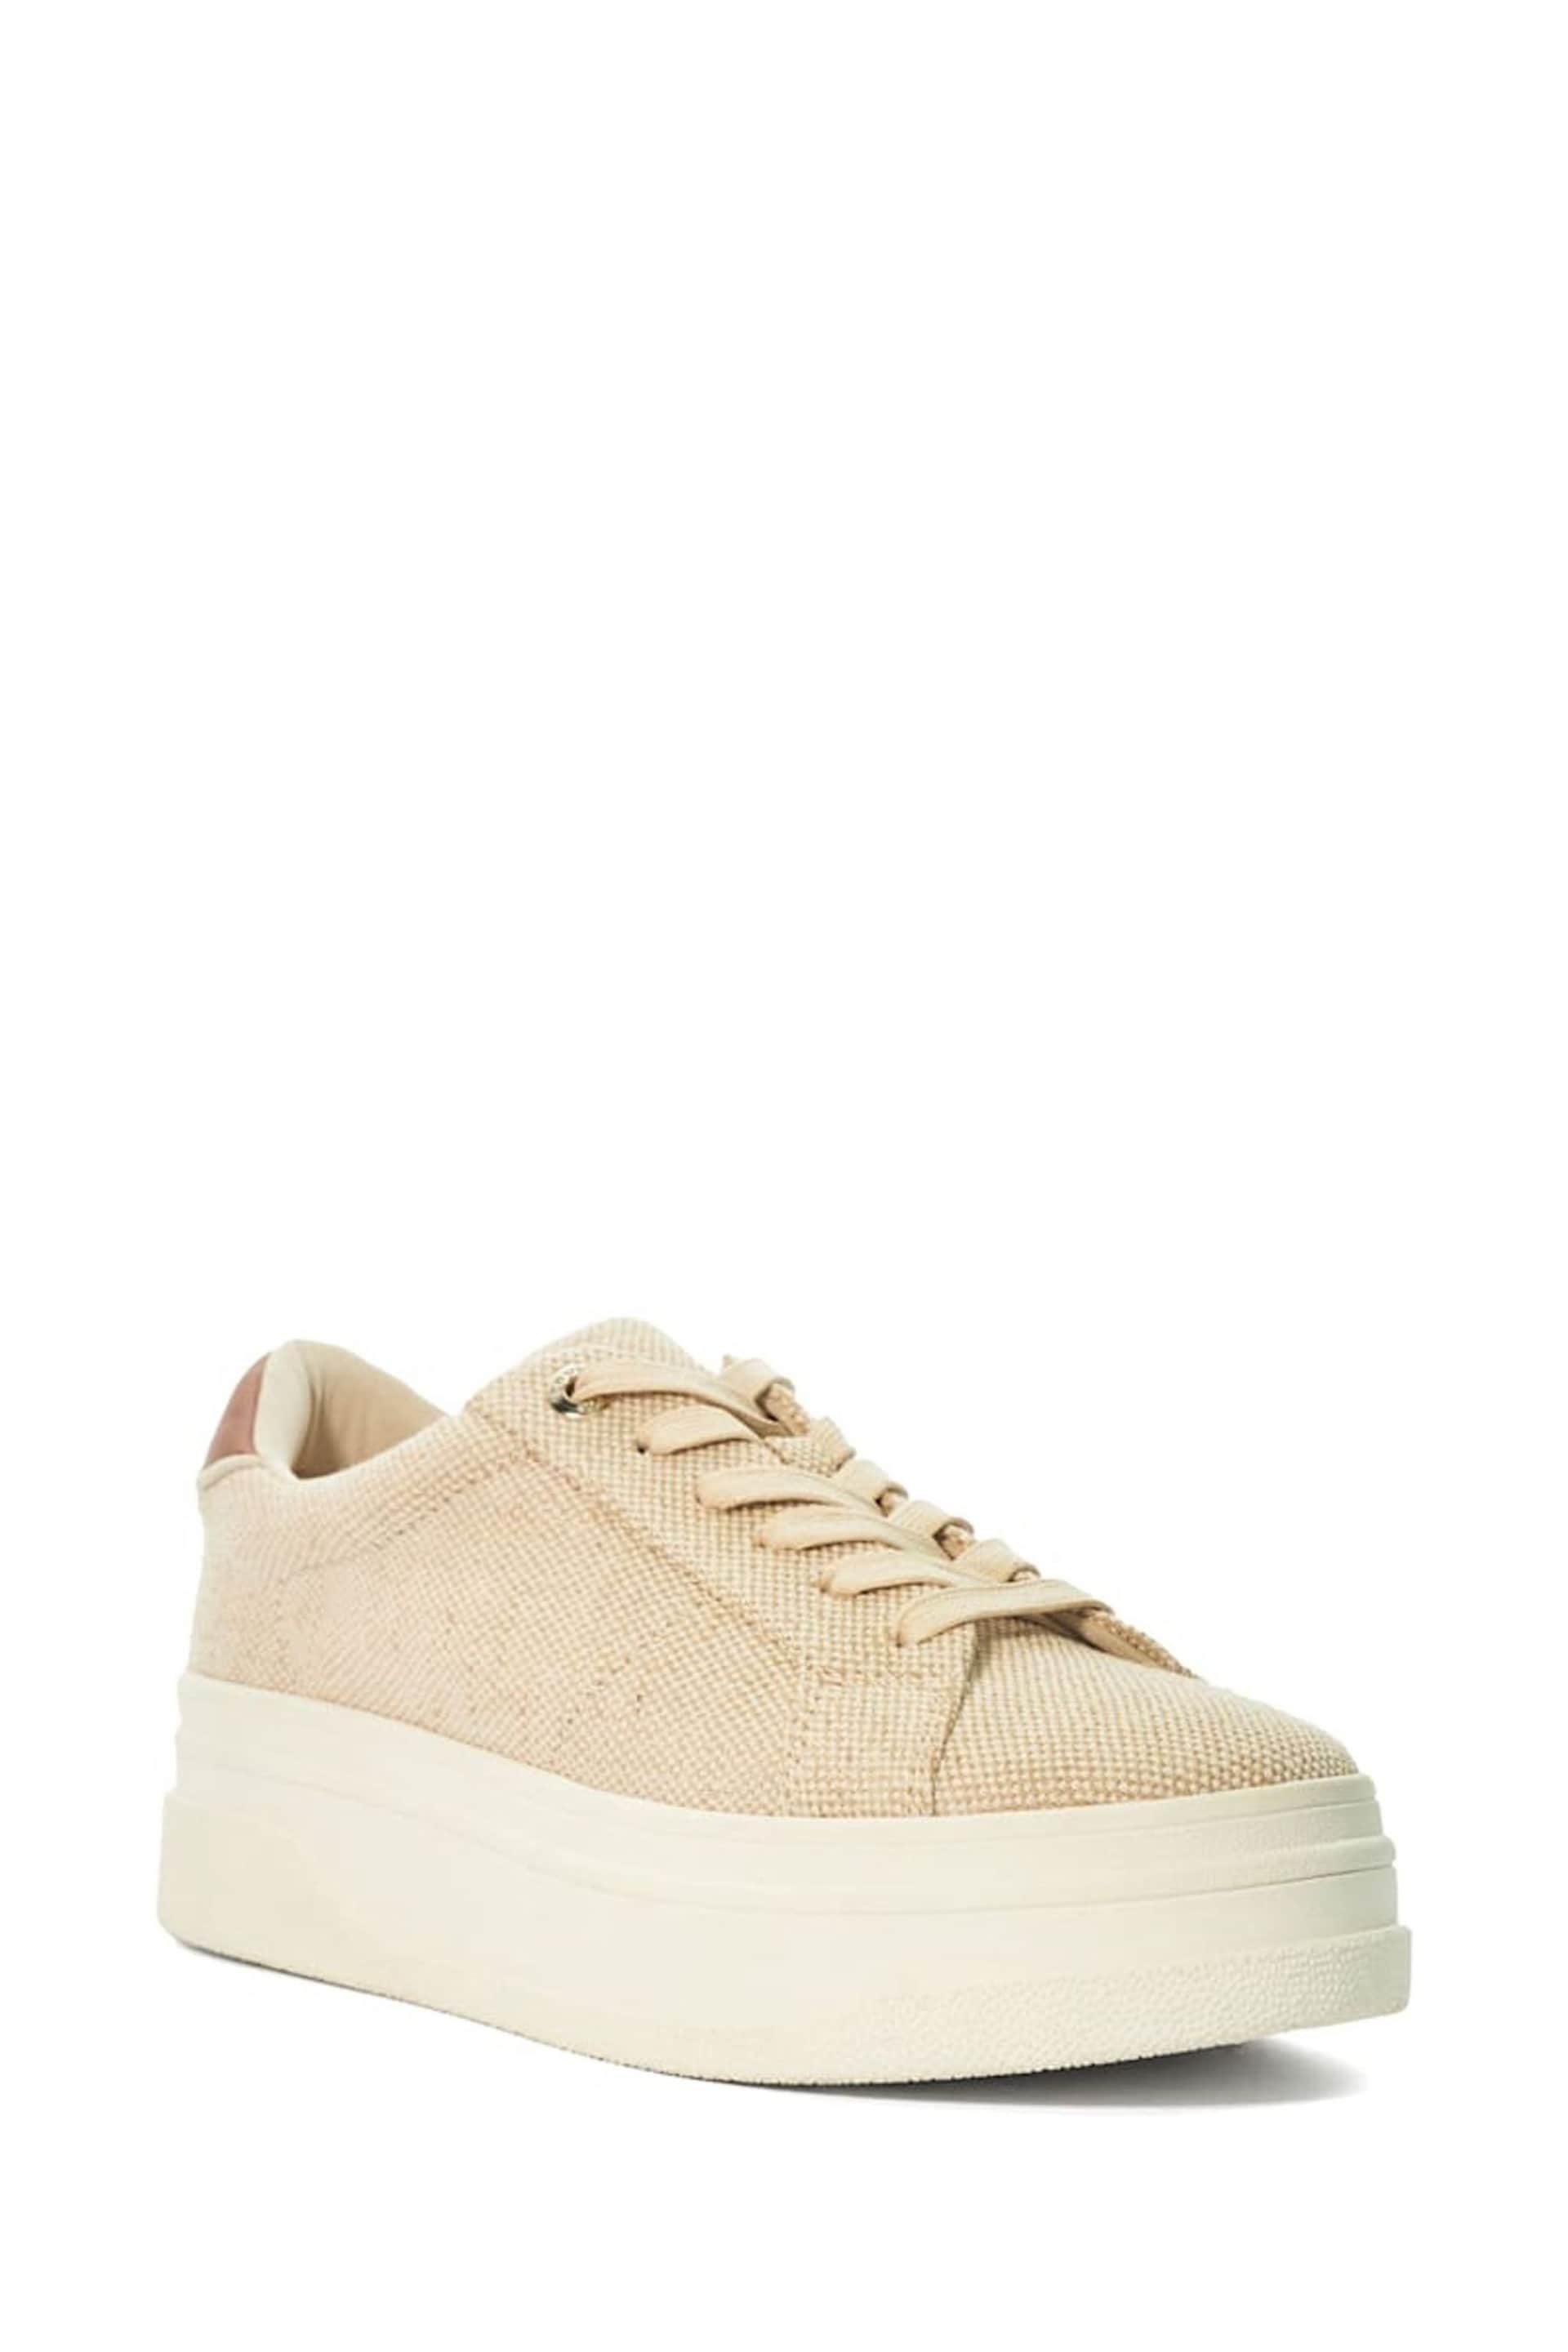 Dune London Cream Exaggerate Bumper Flatform Lace-up Trainers - Image 4 of 6